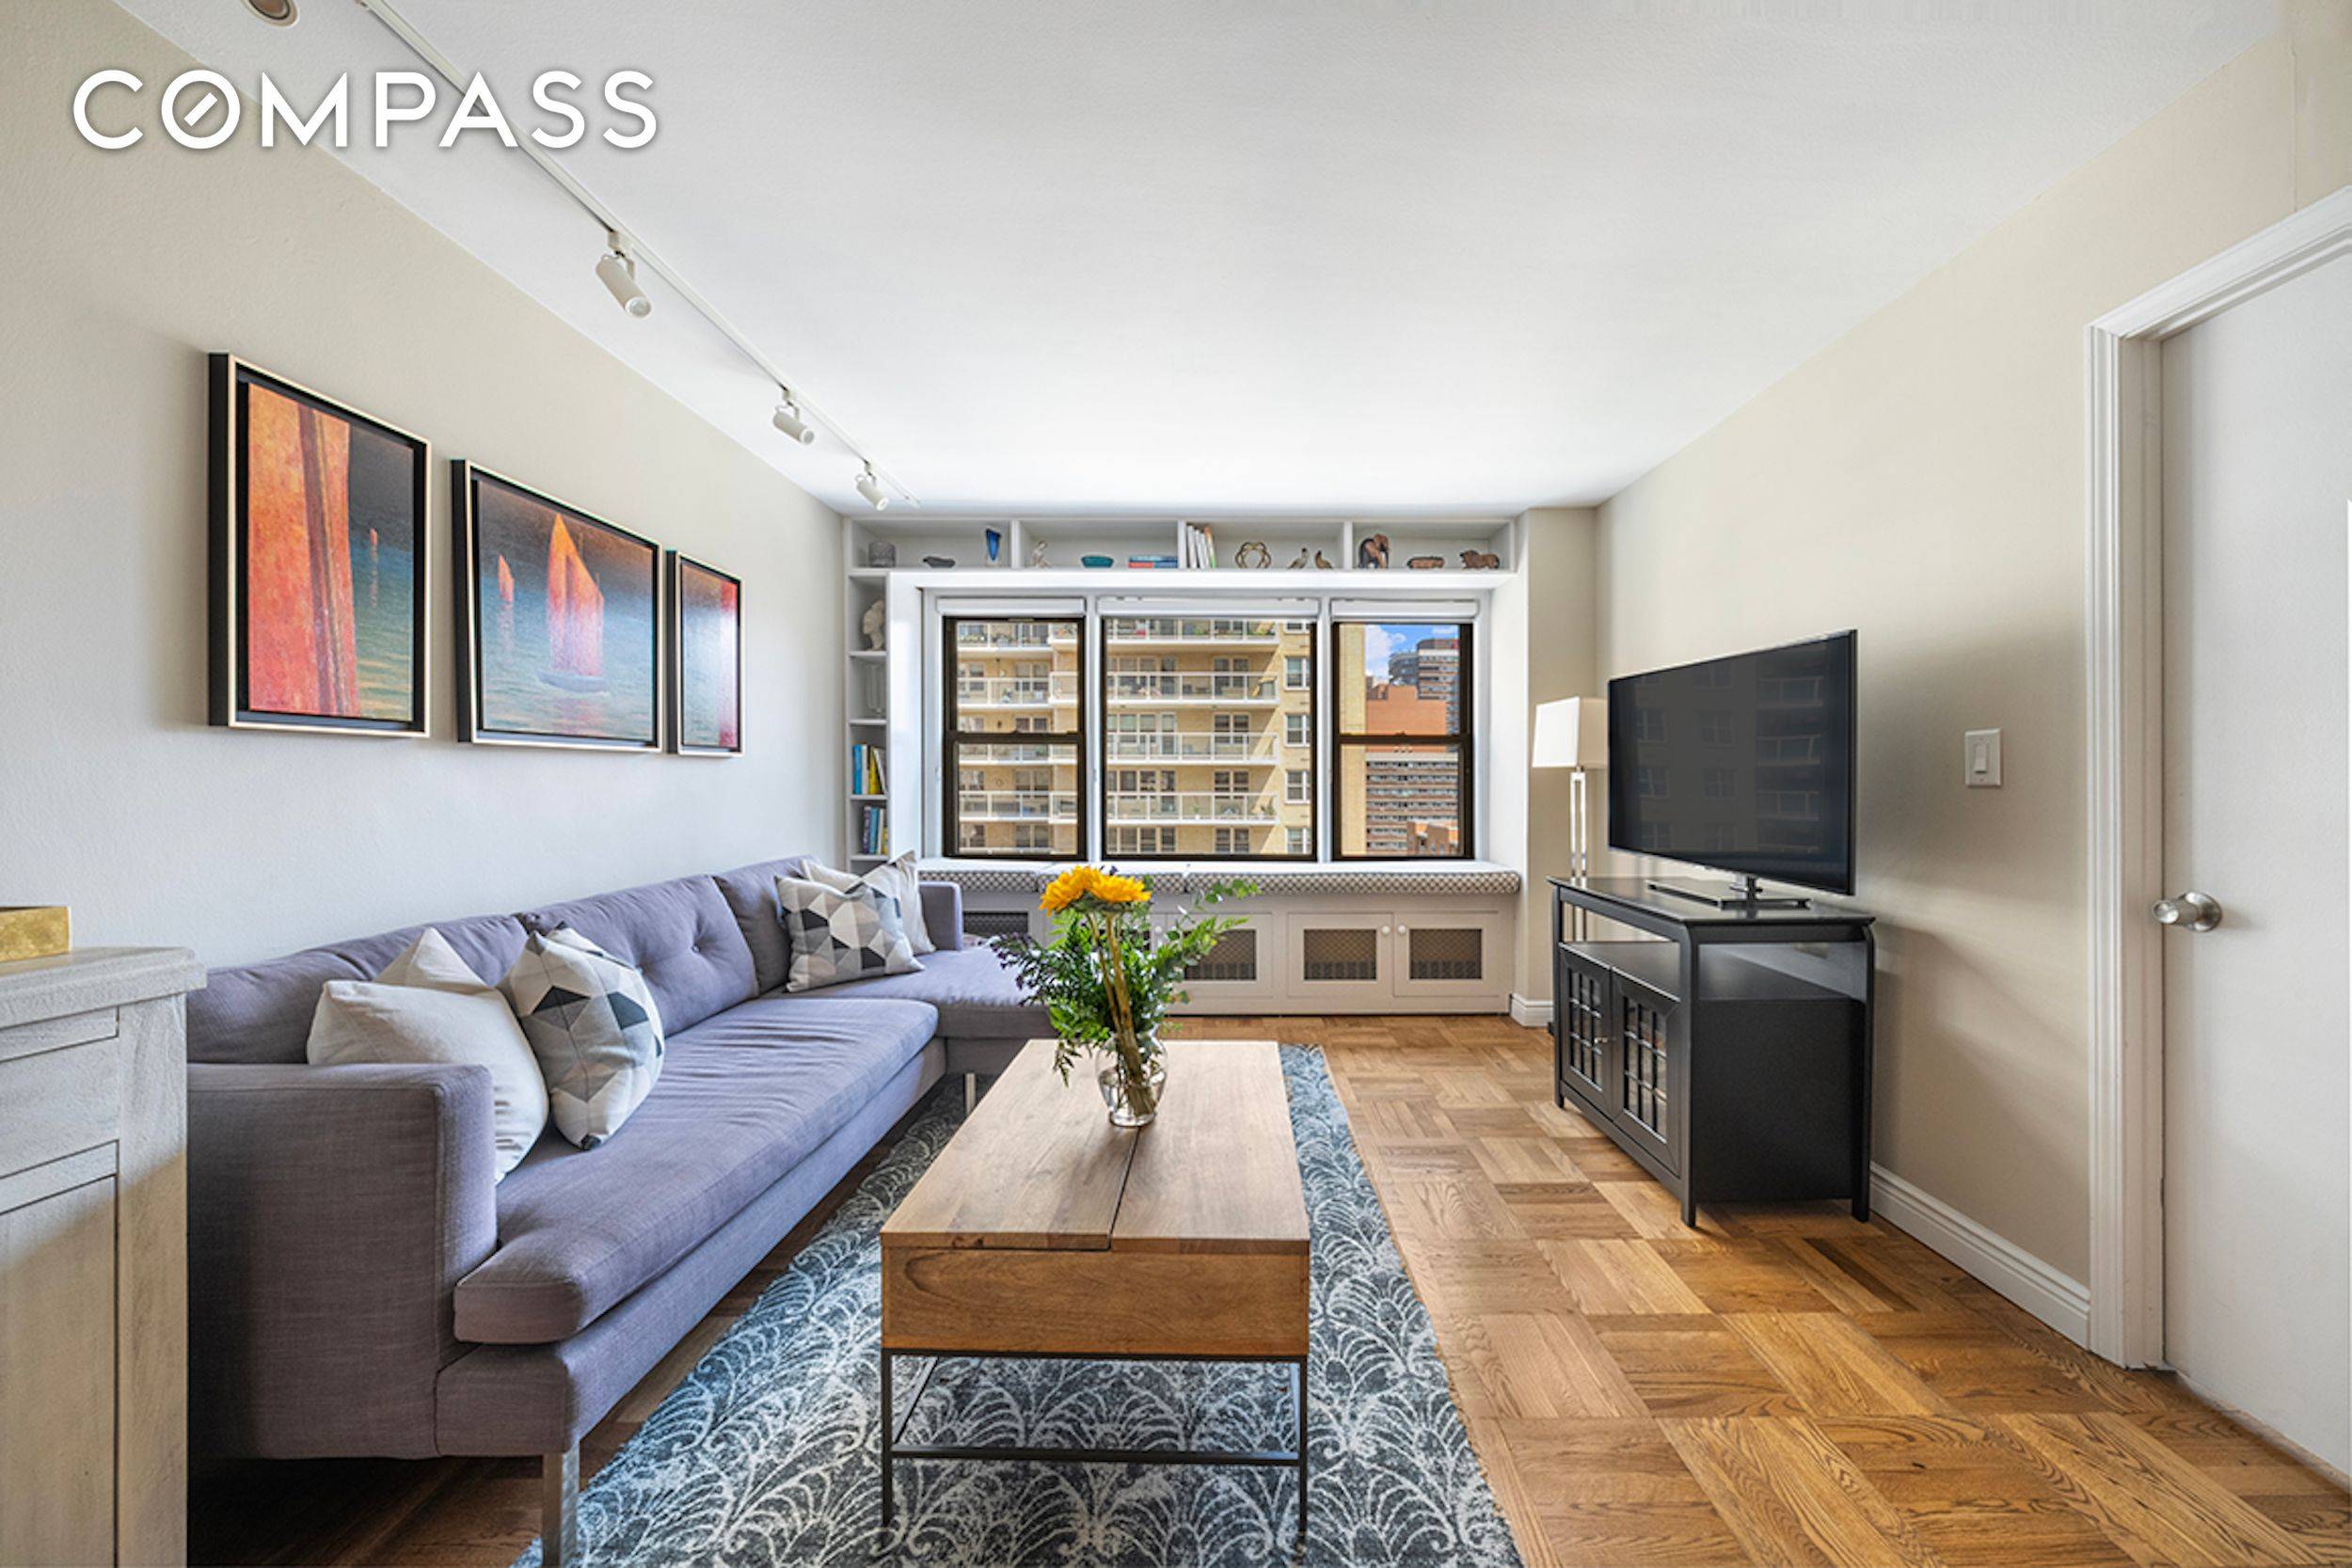 This spacious 2 bedroom apartment offers oversized windows and an abundance of natural light.